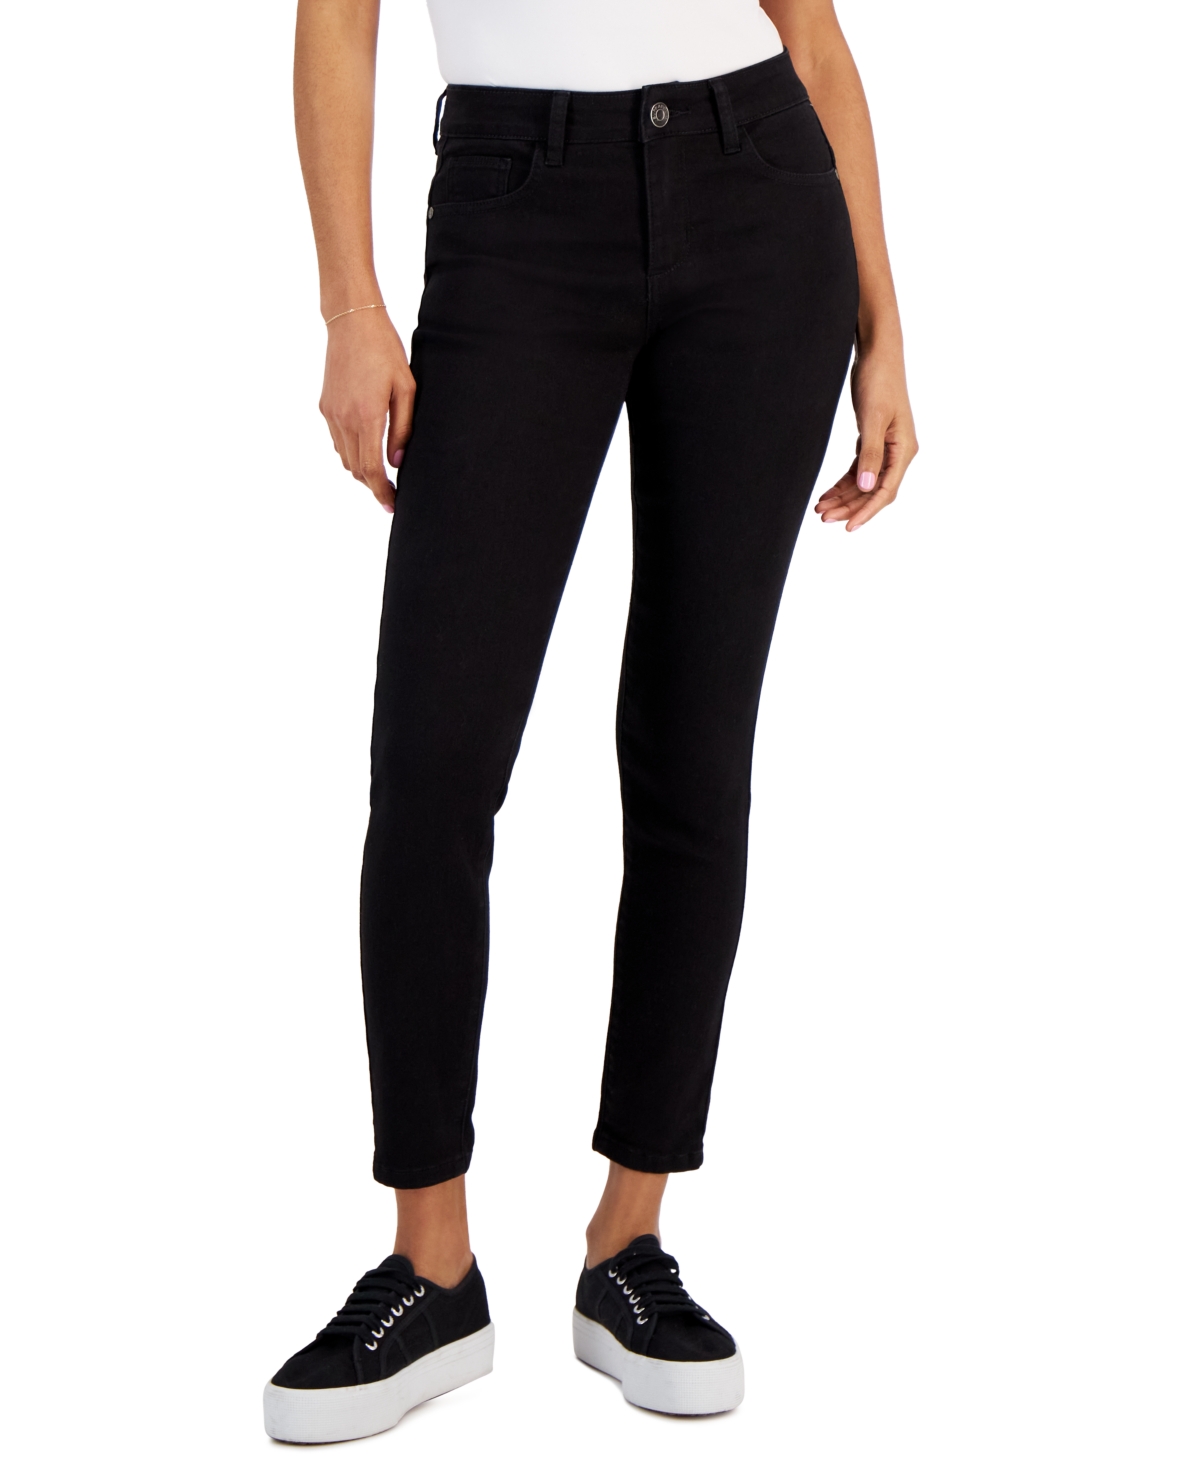 Gogo Jeans Juniors' Extra Curvy Skinny Ankle Jeans In Black